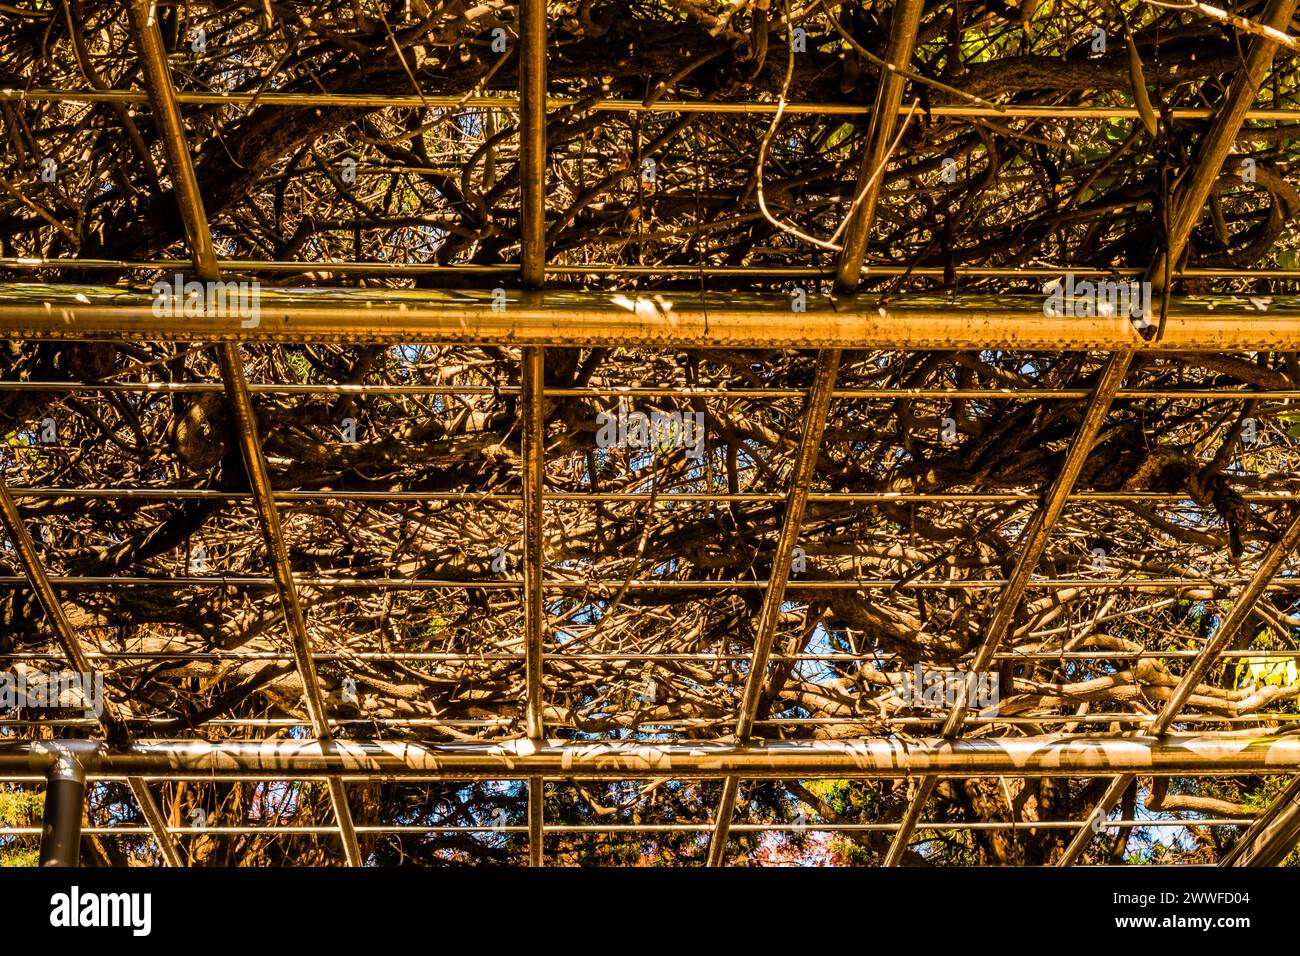 The dappled shade pattern created by branches over a pergola, in South Korea Stock Photo